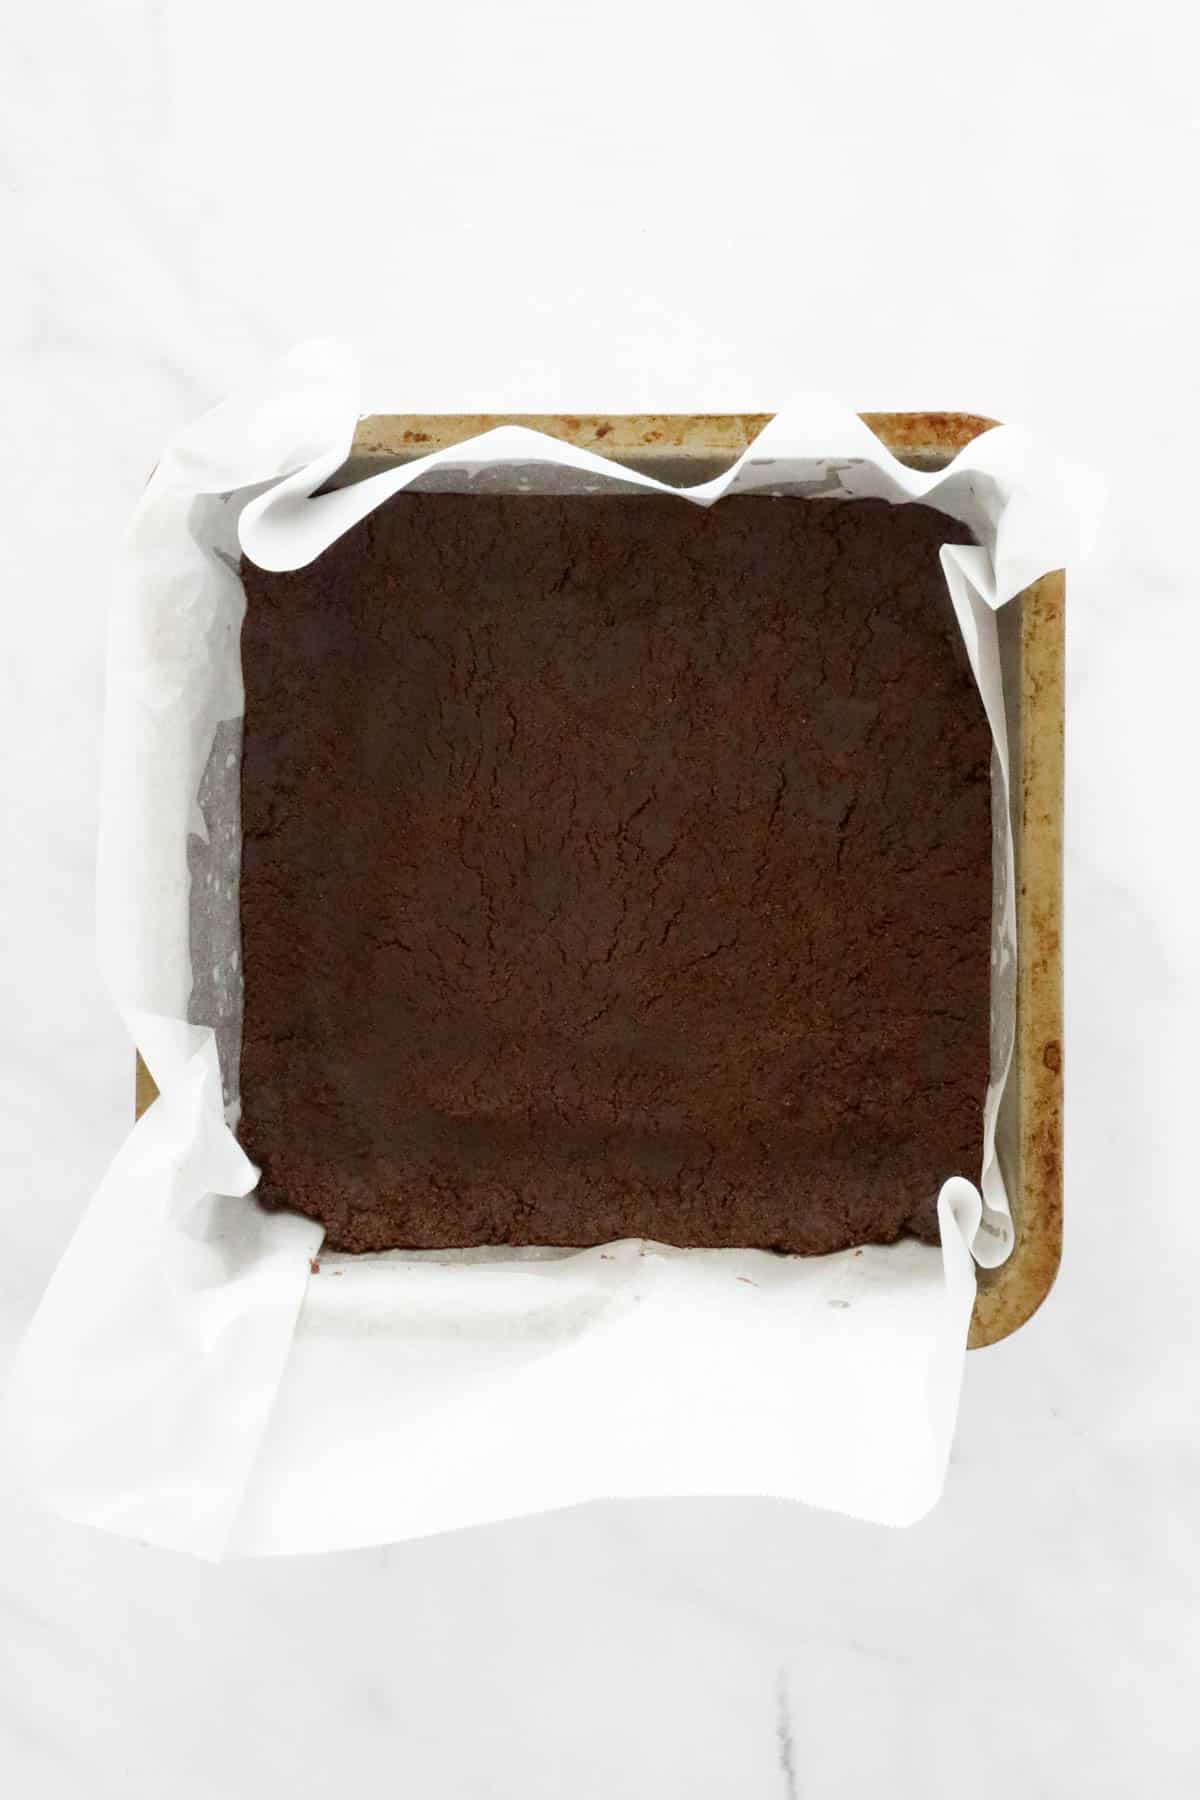 The chocolate biscuit base pressed into a lined square tin.